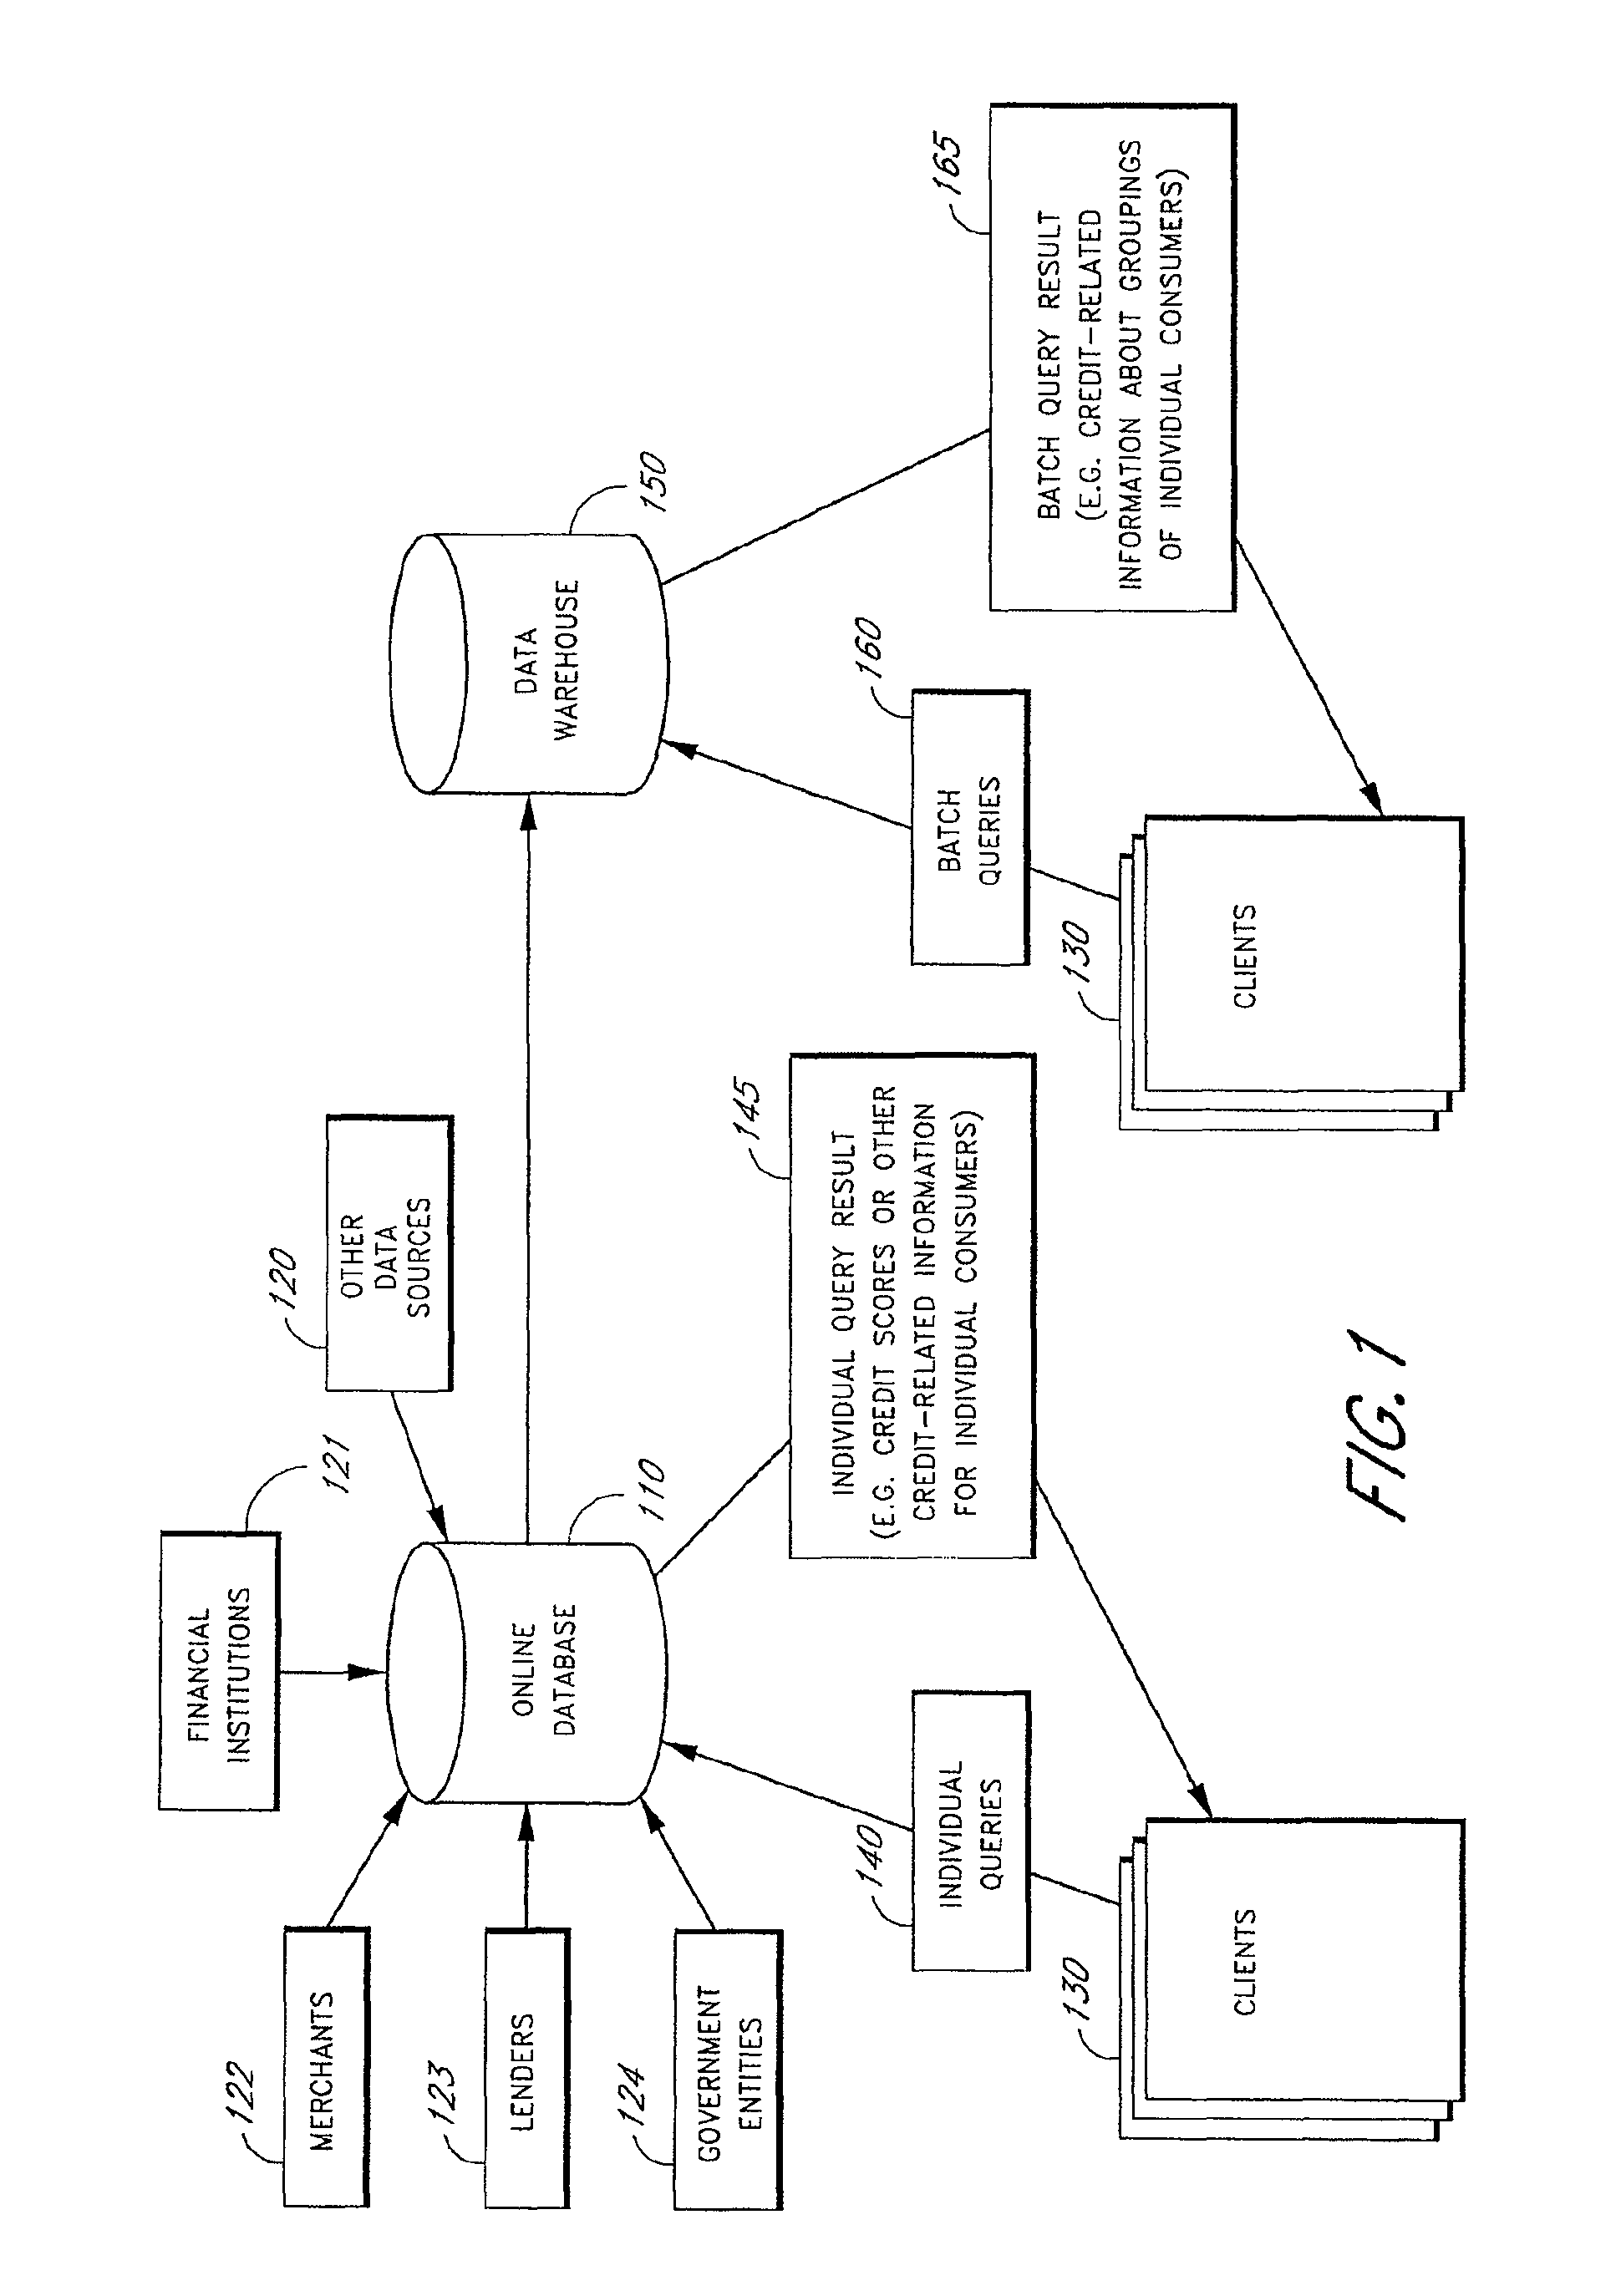 Systems and methods for optimizing database queries